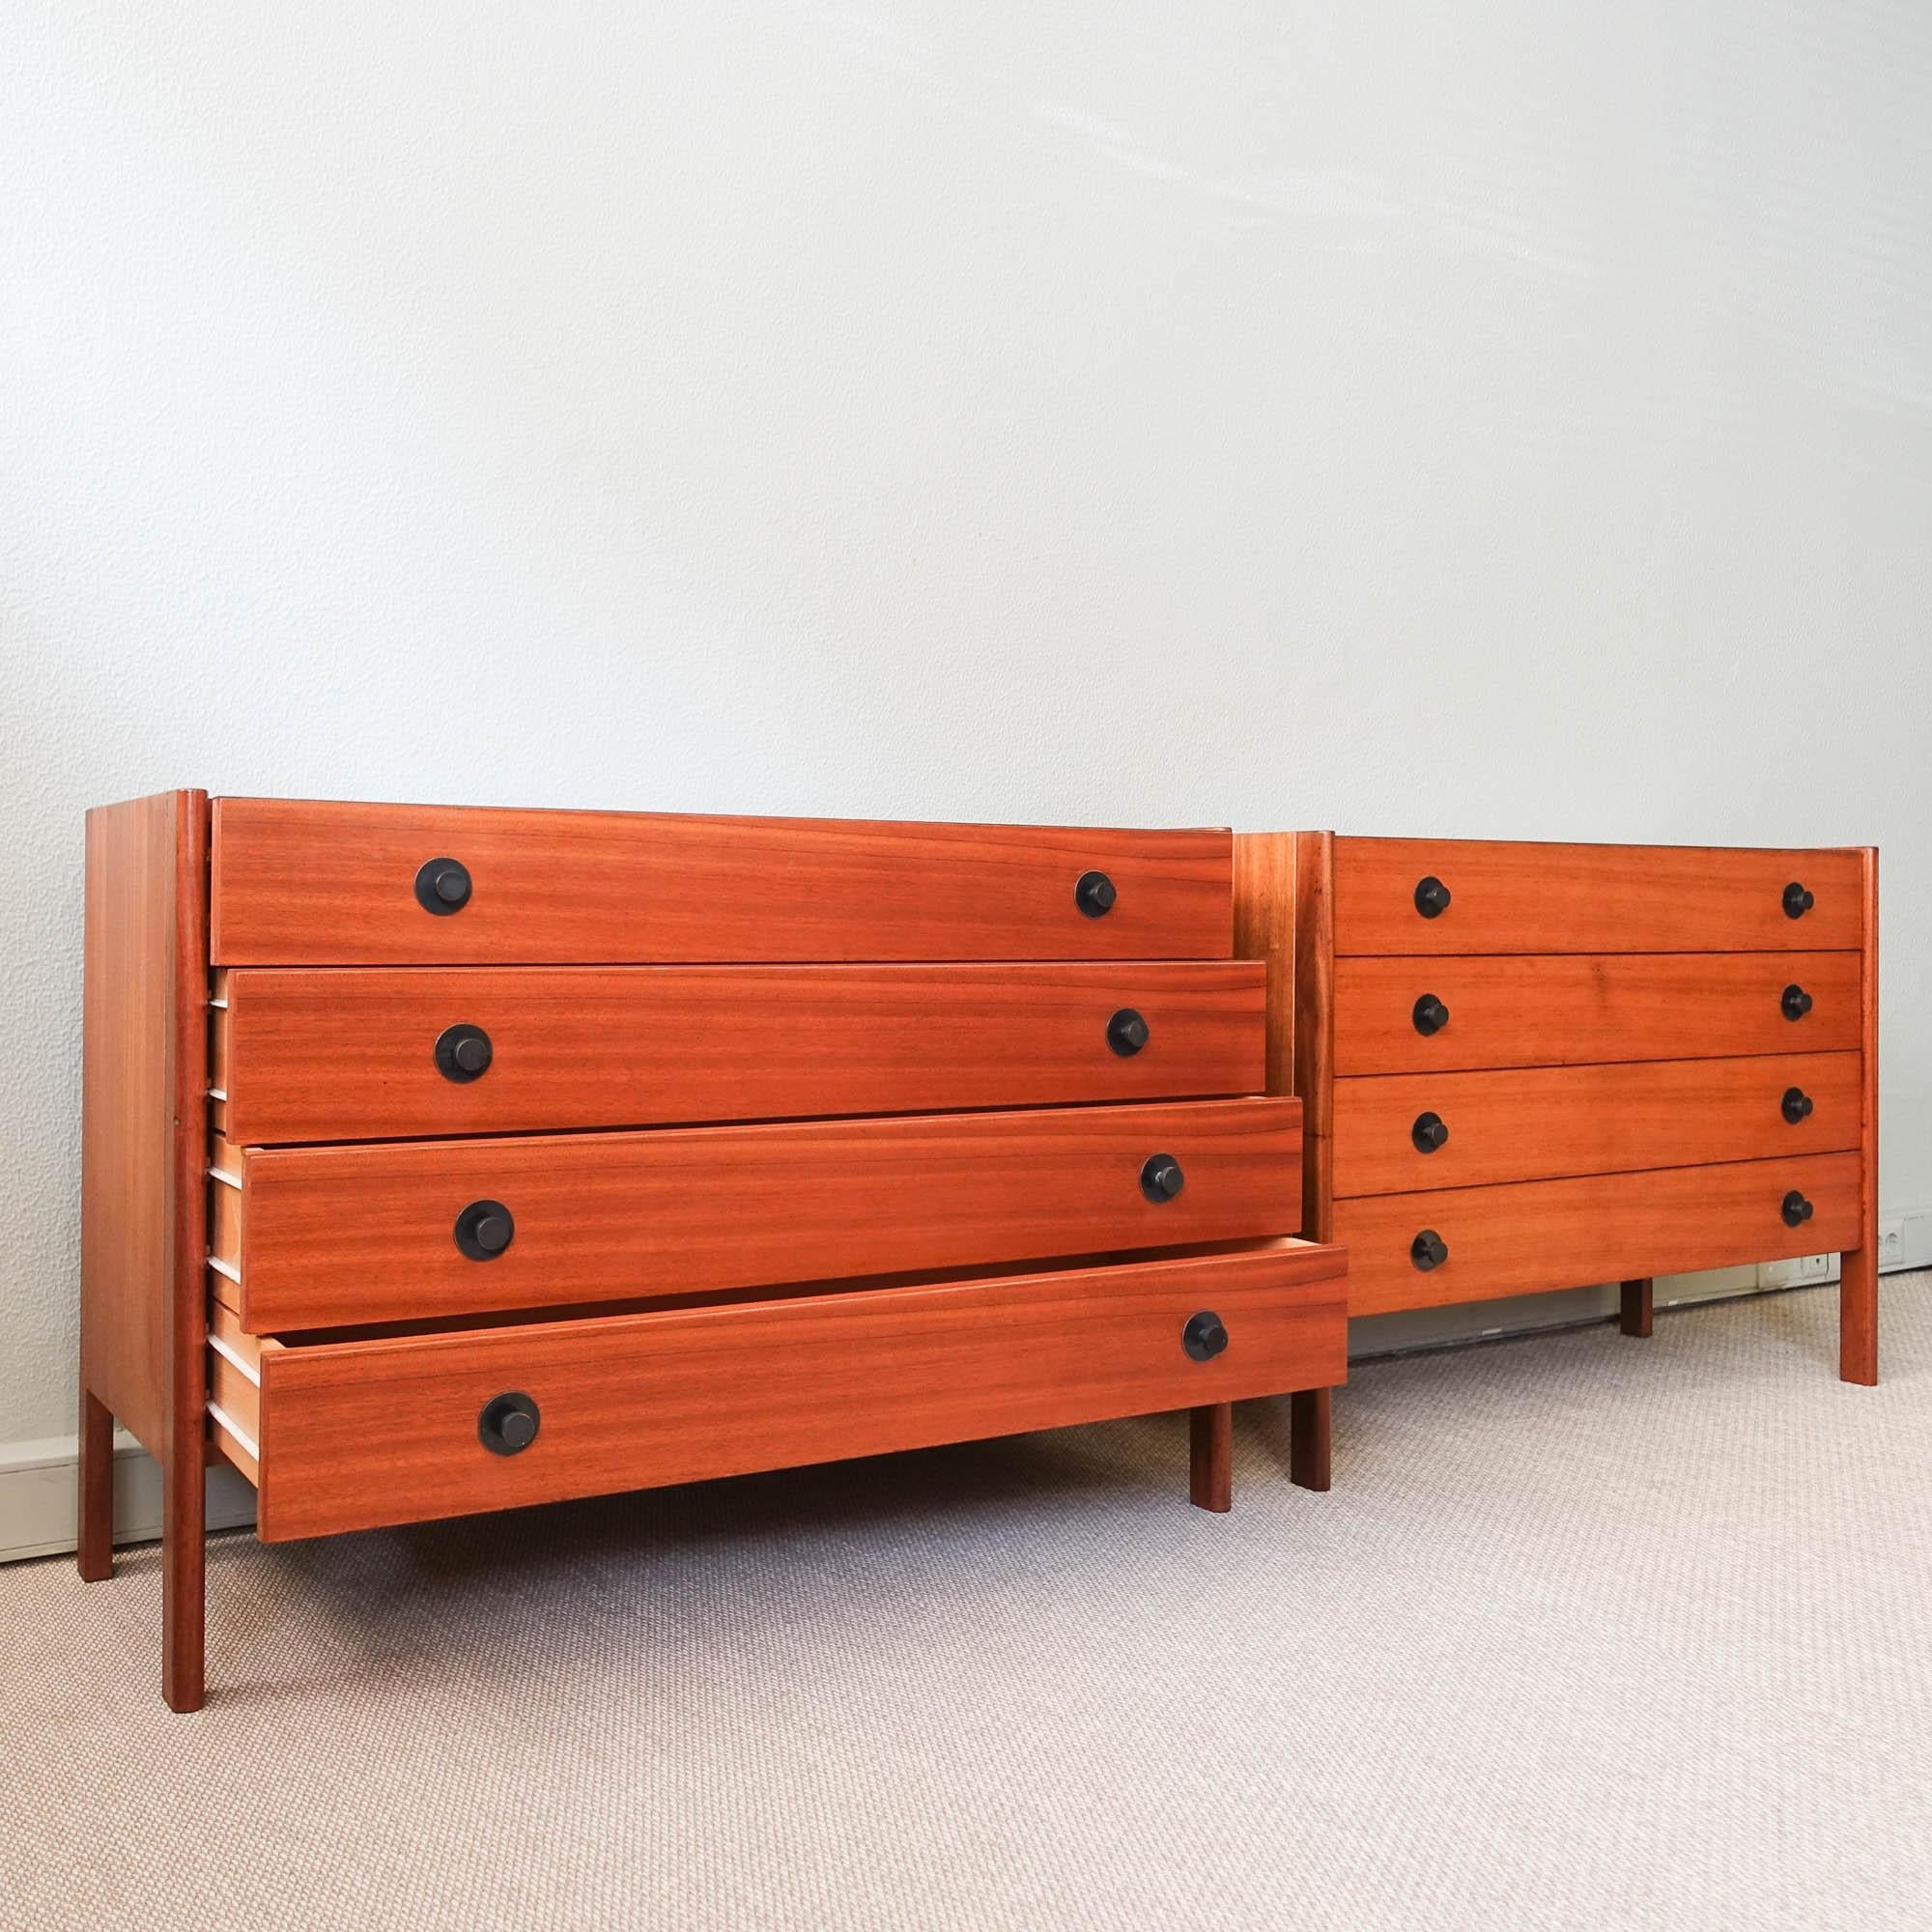 Portuguese Pair of Vintage Chest of Drawers from José Espinho for Olaio, 1970's